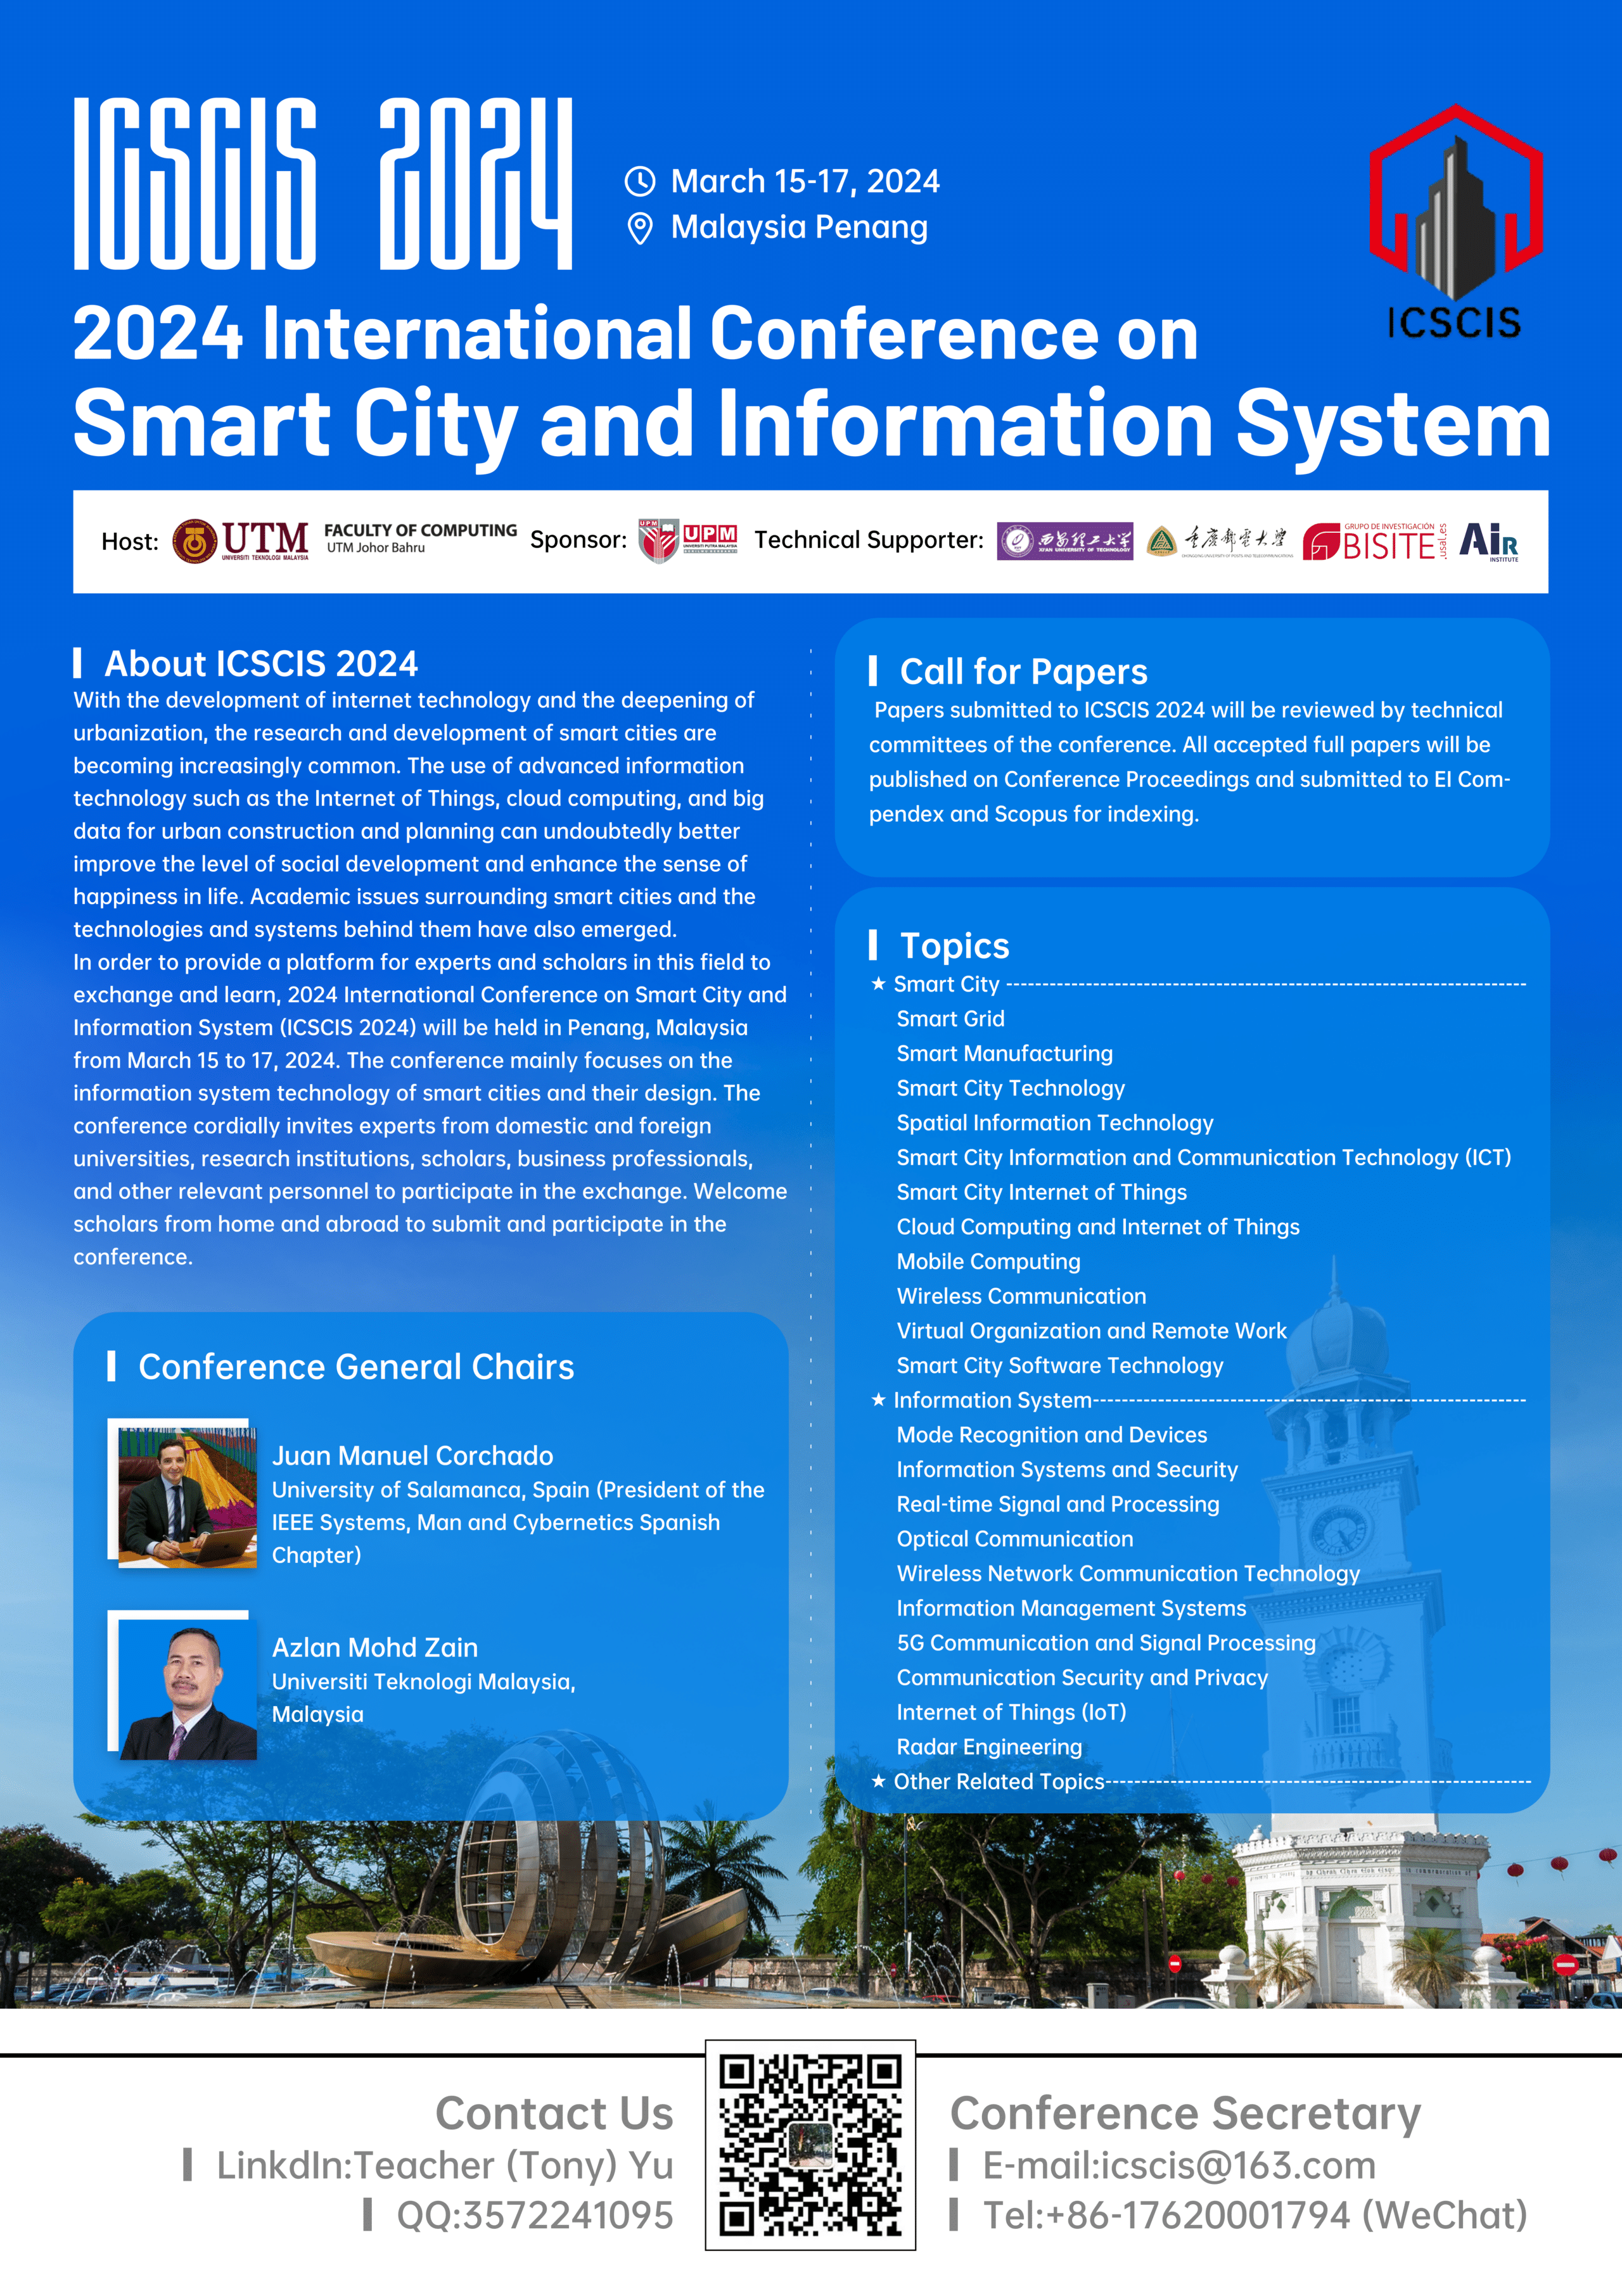 2024 International Conference on Smart City and Information System (ICSCIS 2024)